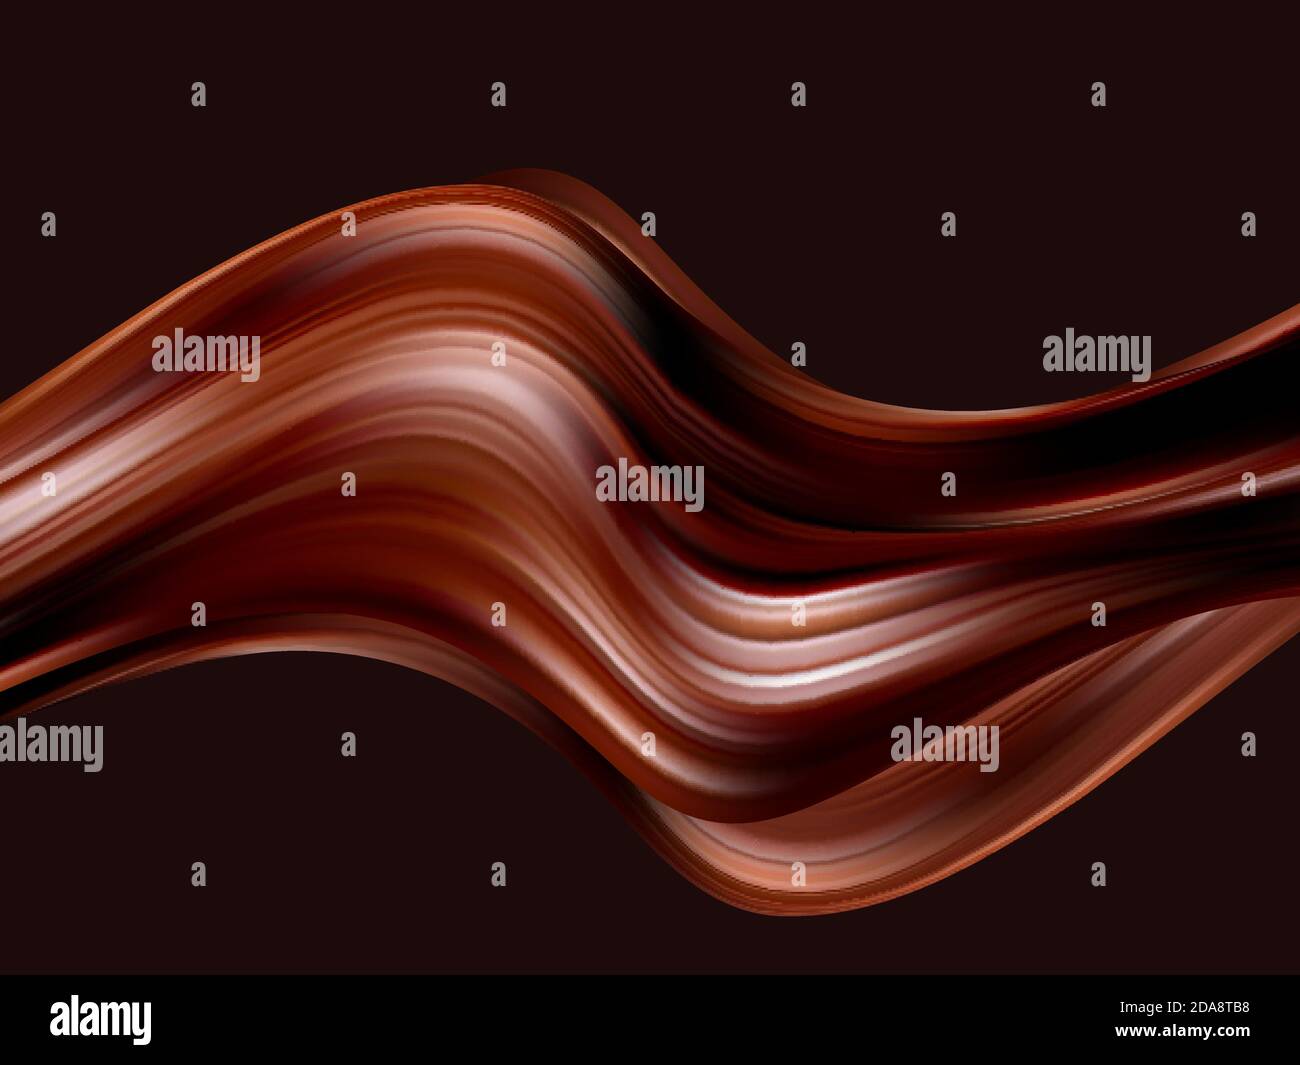 Chocolate wavy background. Abstract satin chocolate waves, brown color flow. Vector Stock Vector